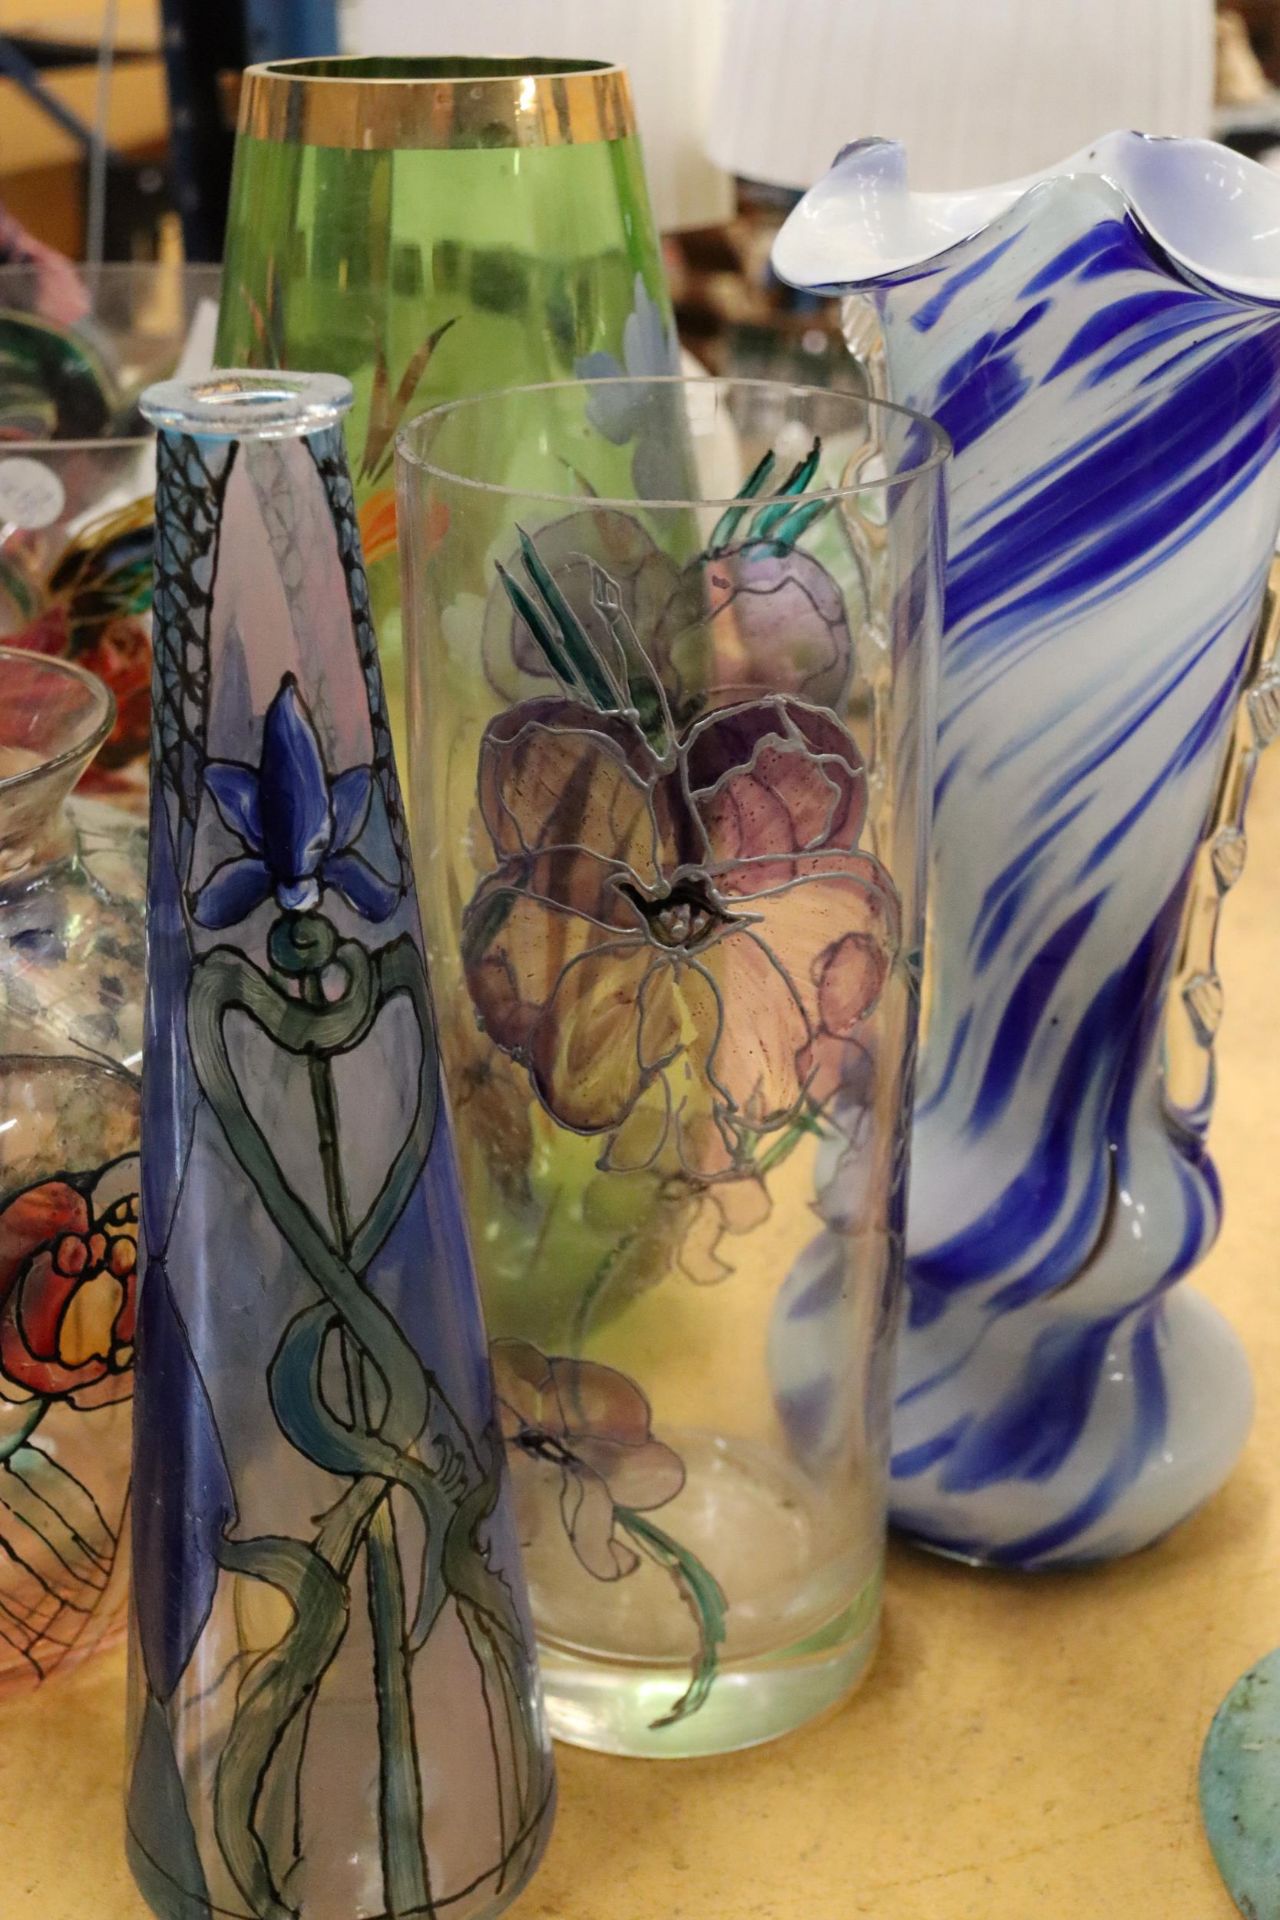 A LARGE MIXED LOT OF PAINTED ON GLASS VASES PLUS ONE DELCROFT WARE CERAMIC VASE - Image 5 of 11